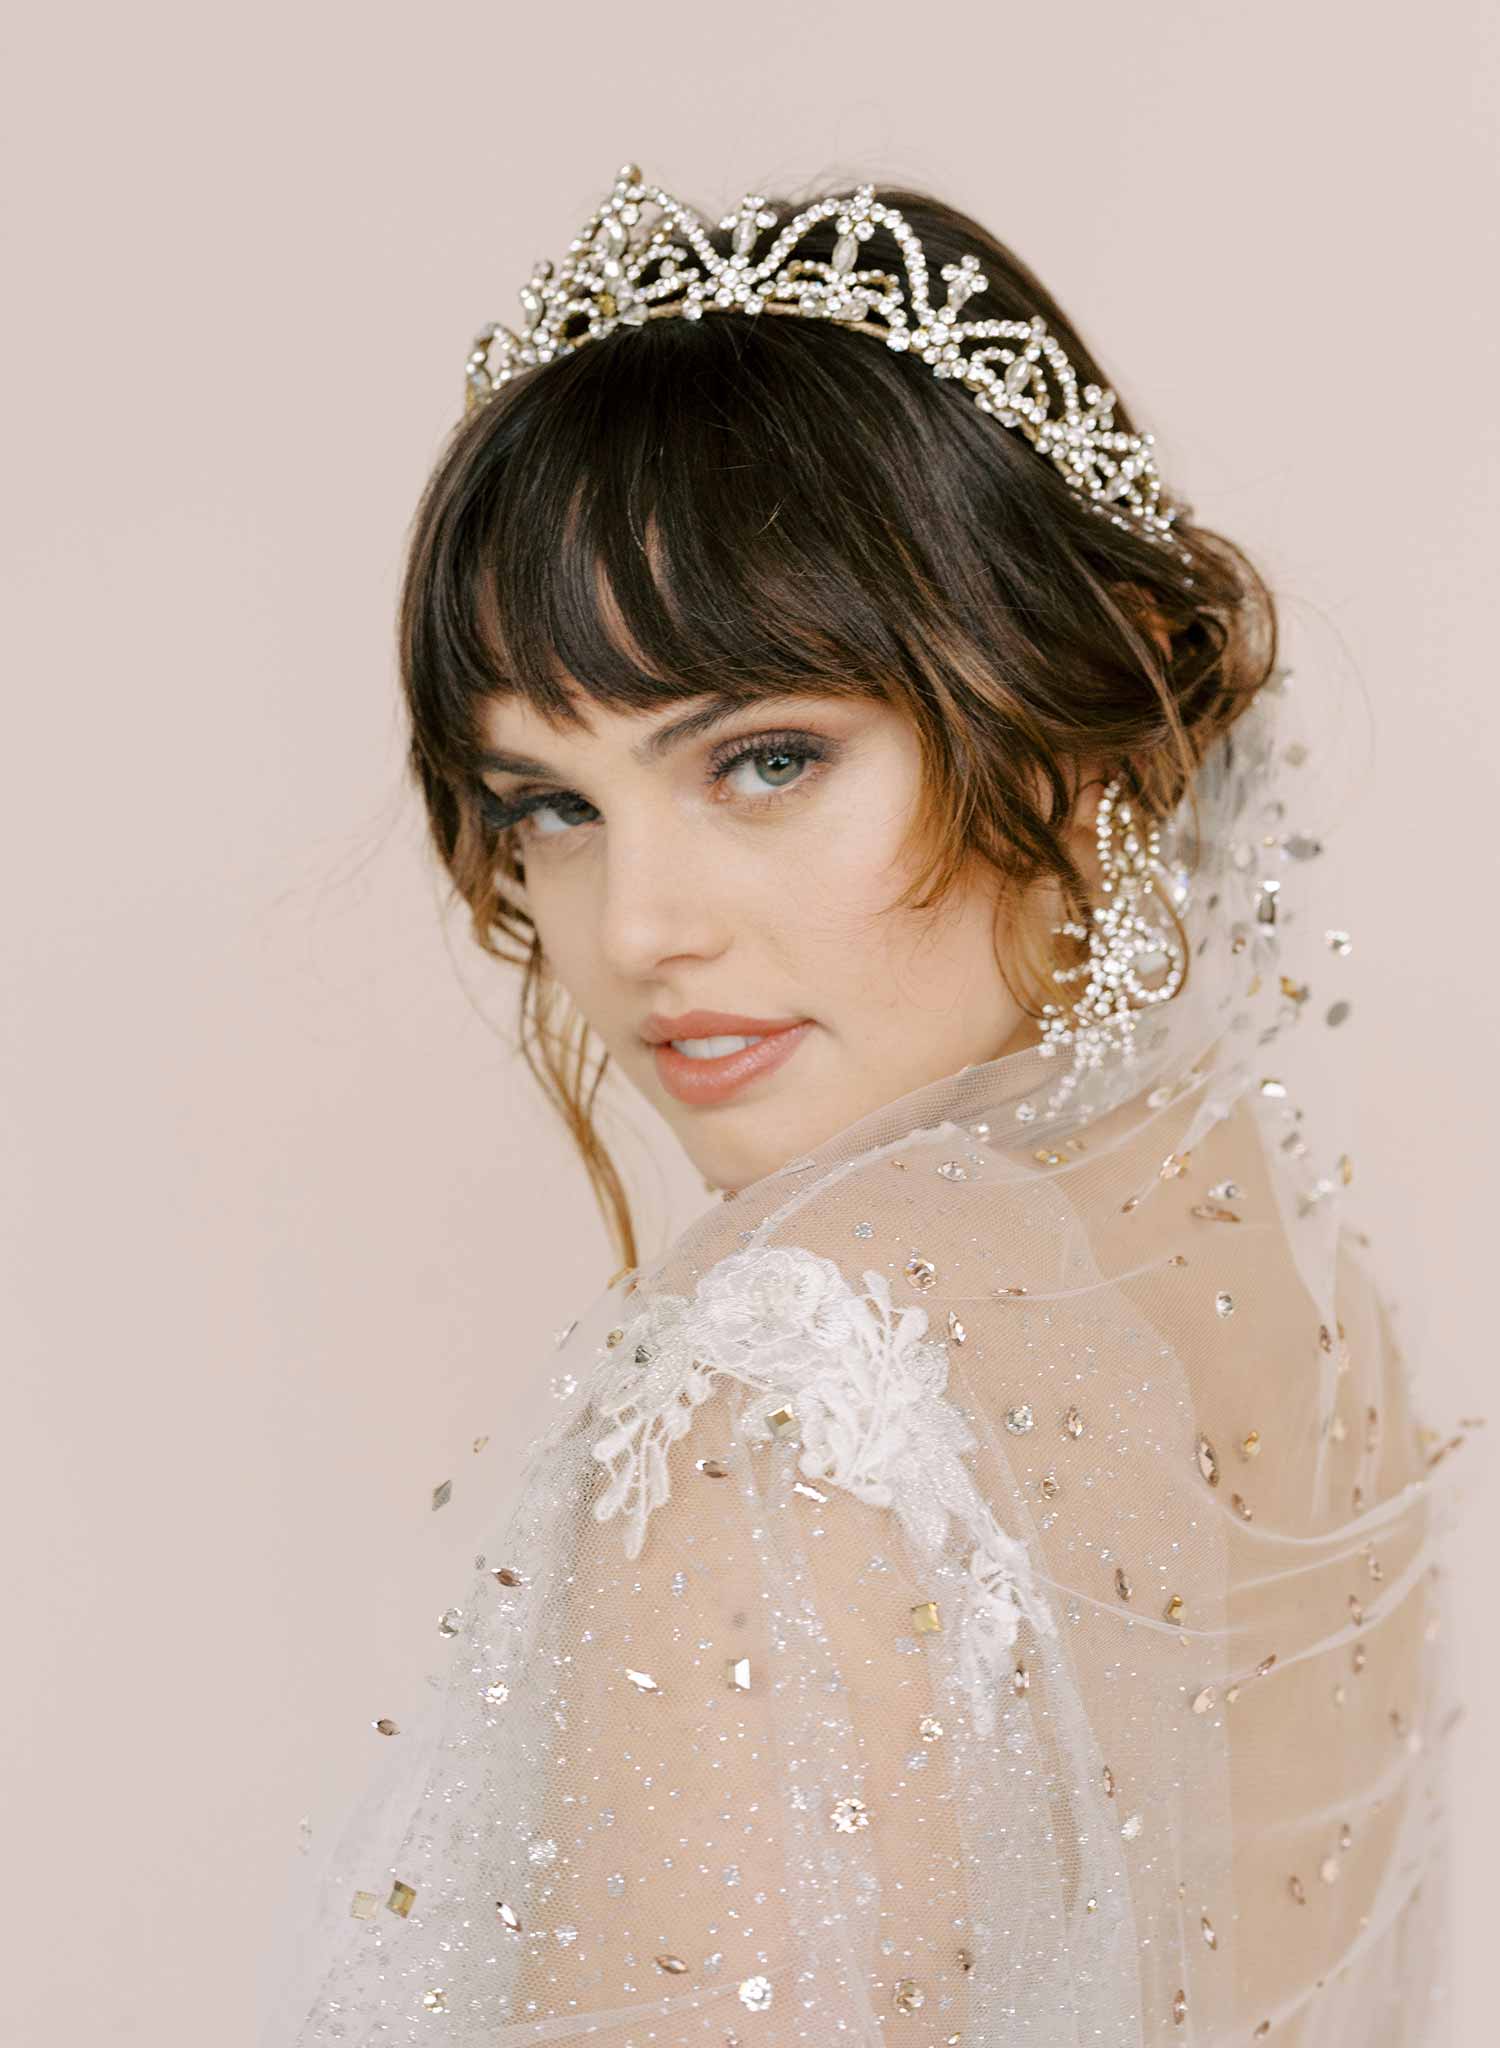 Wedding Crowns and Tiaras: Wear Them With (or Without) a Veil